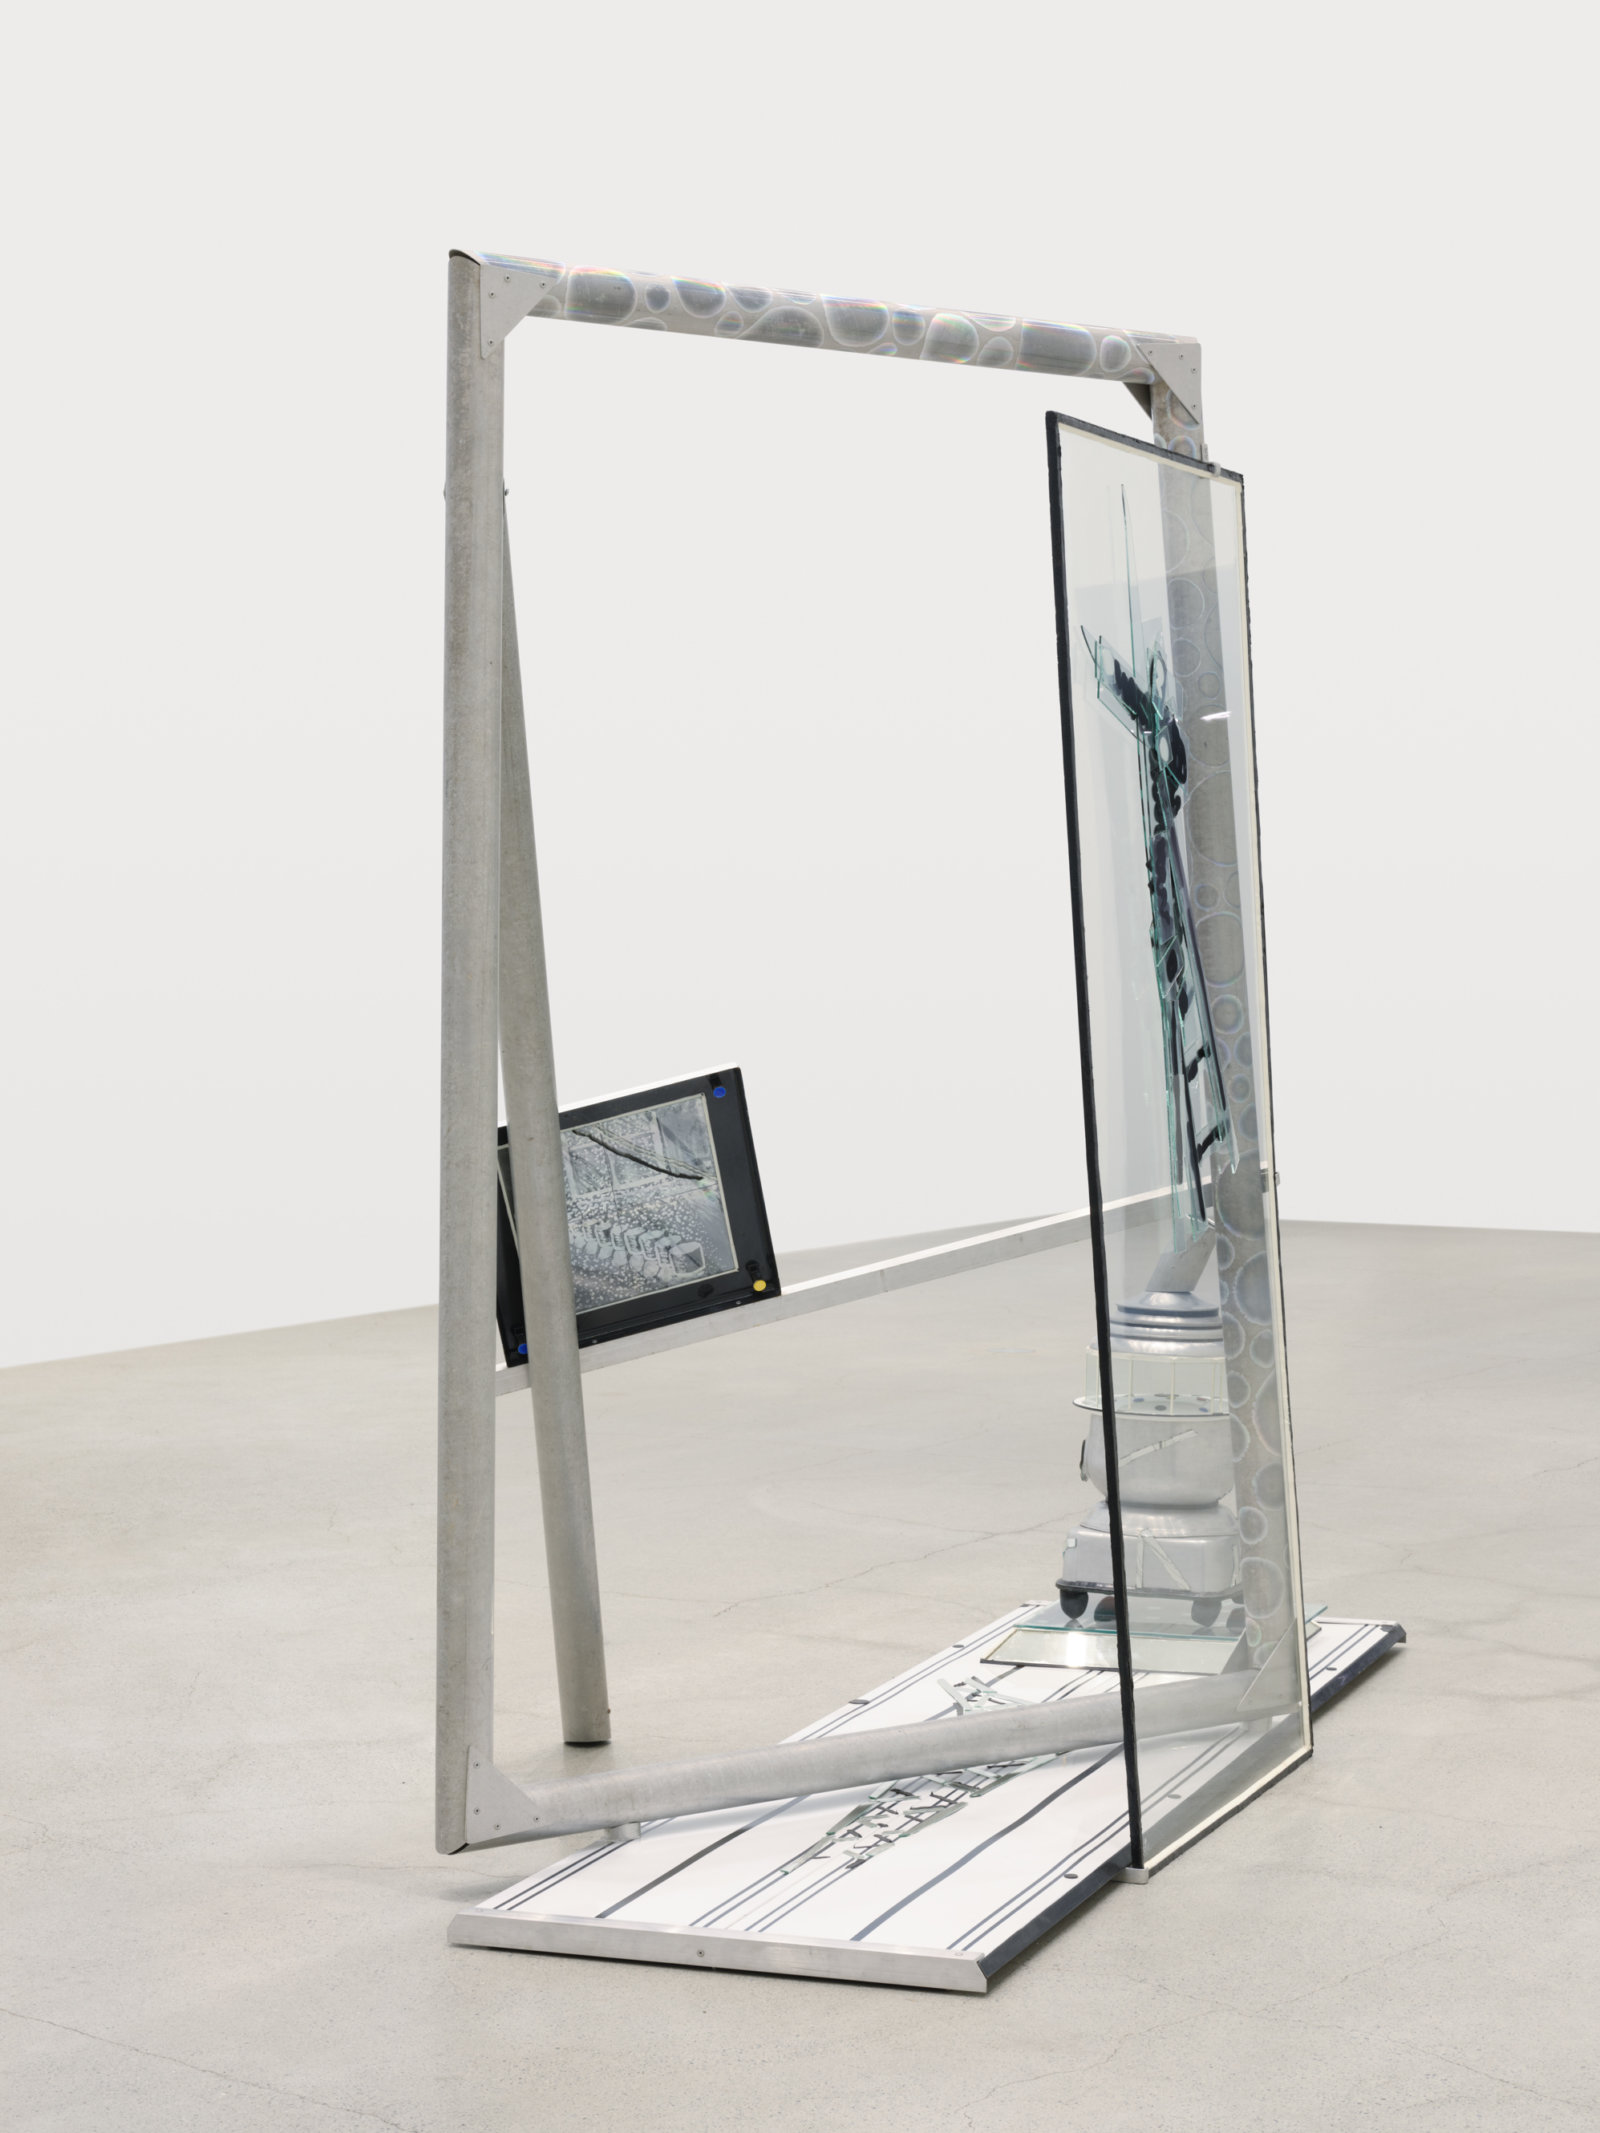 Jerry Pethick, One Side of Seurat, 1983, enamelled steel, aluminum, mirror, glass, silicone seal, etched spectrafoil, enamelled copper, 86 x 95 1/2 x 45 in. (218 x 243 x 114 cm)